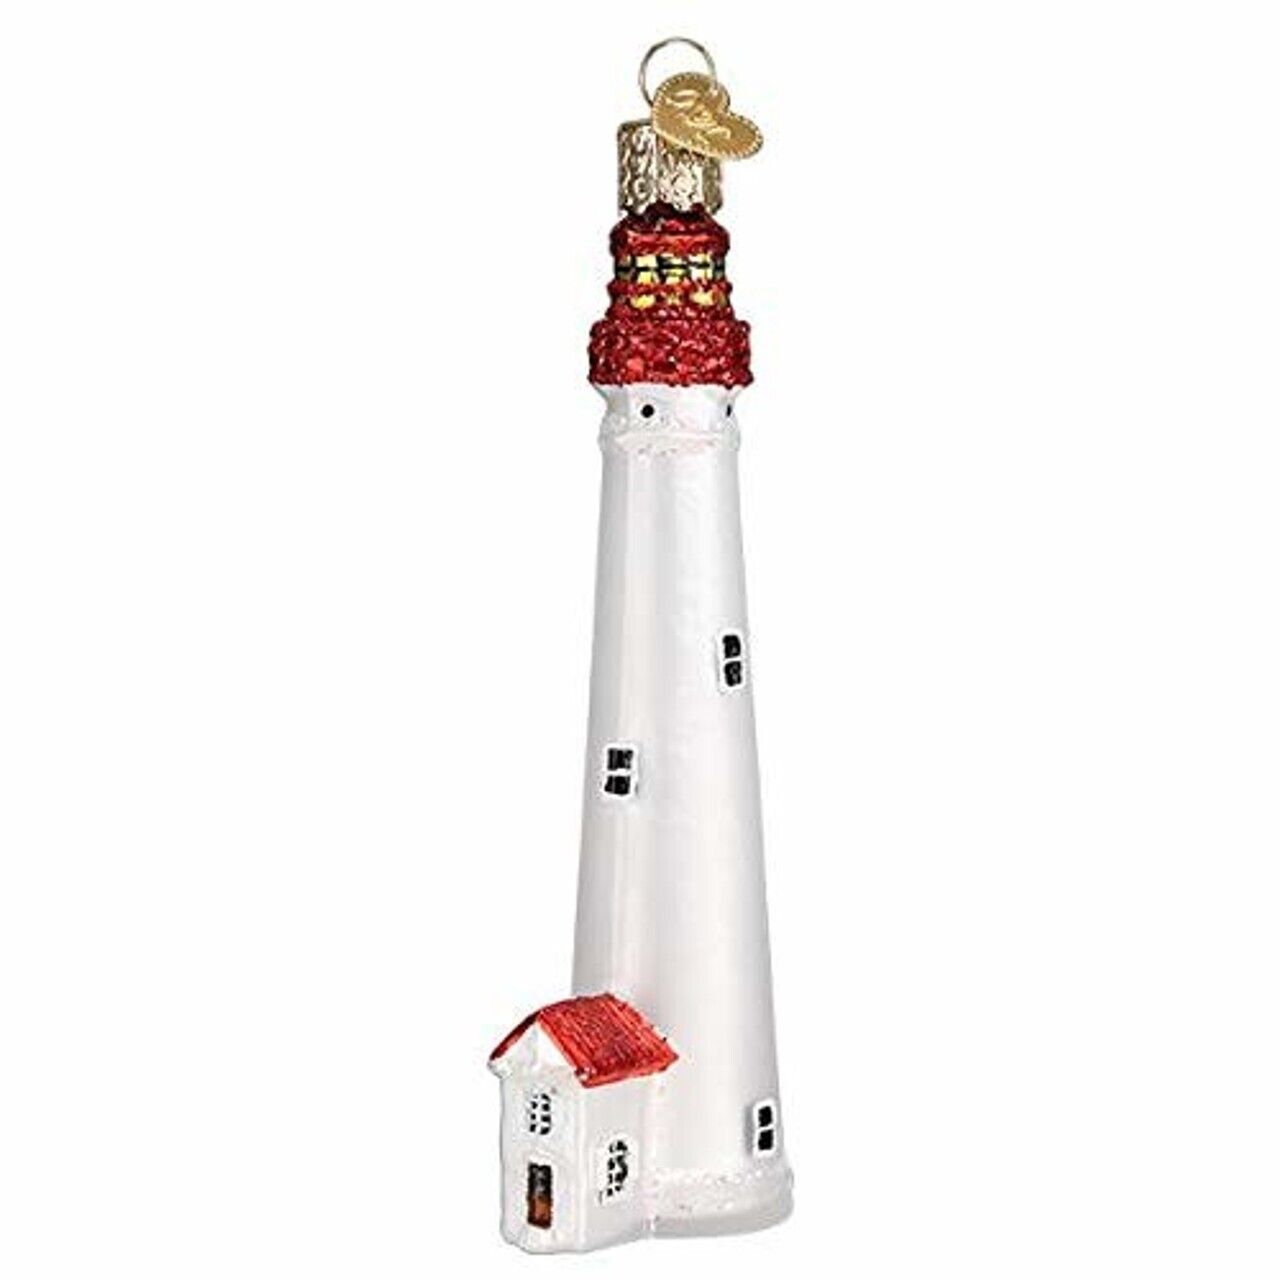 Old World Christmas CAPE MAY LIGHTHOUSE (20115) Ornament w/OWC Box